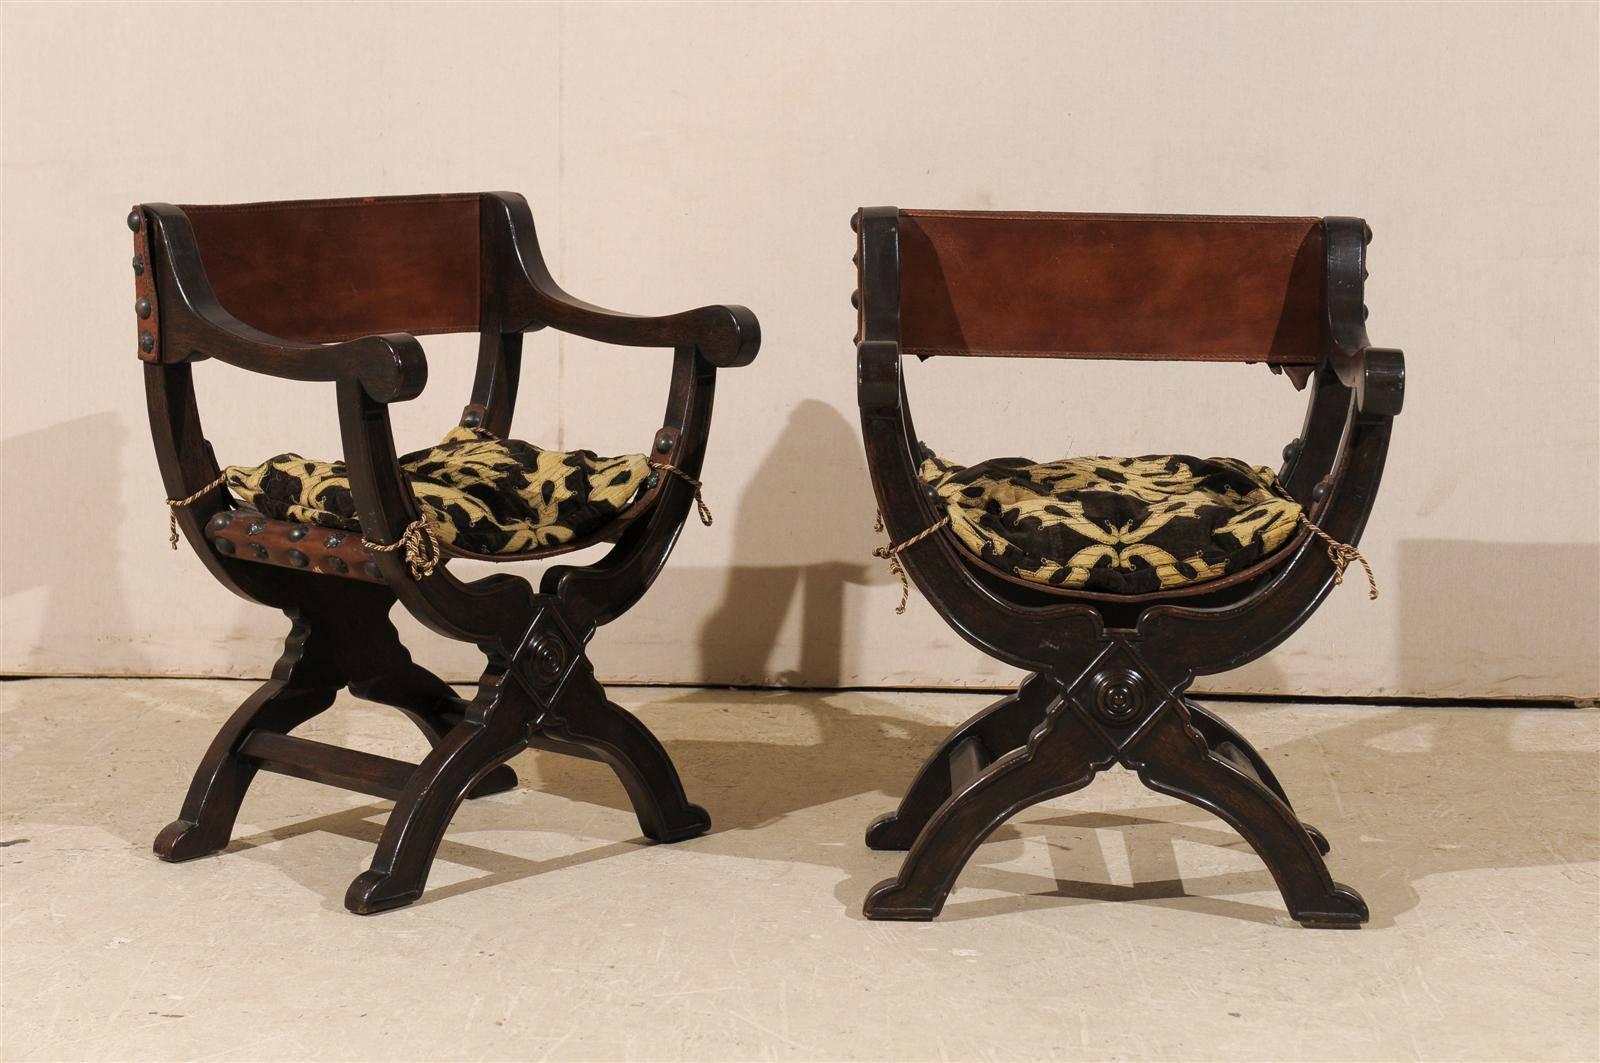 A pair of Italian "Dante," also known as, "Savonarola" style wooden chairs from the 20th century. The seats and backs are done in a nice leather with visible round nail heads. Each chair is adorned with a patterned cushion that